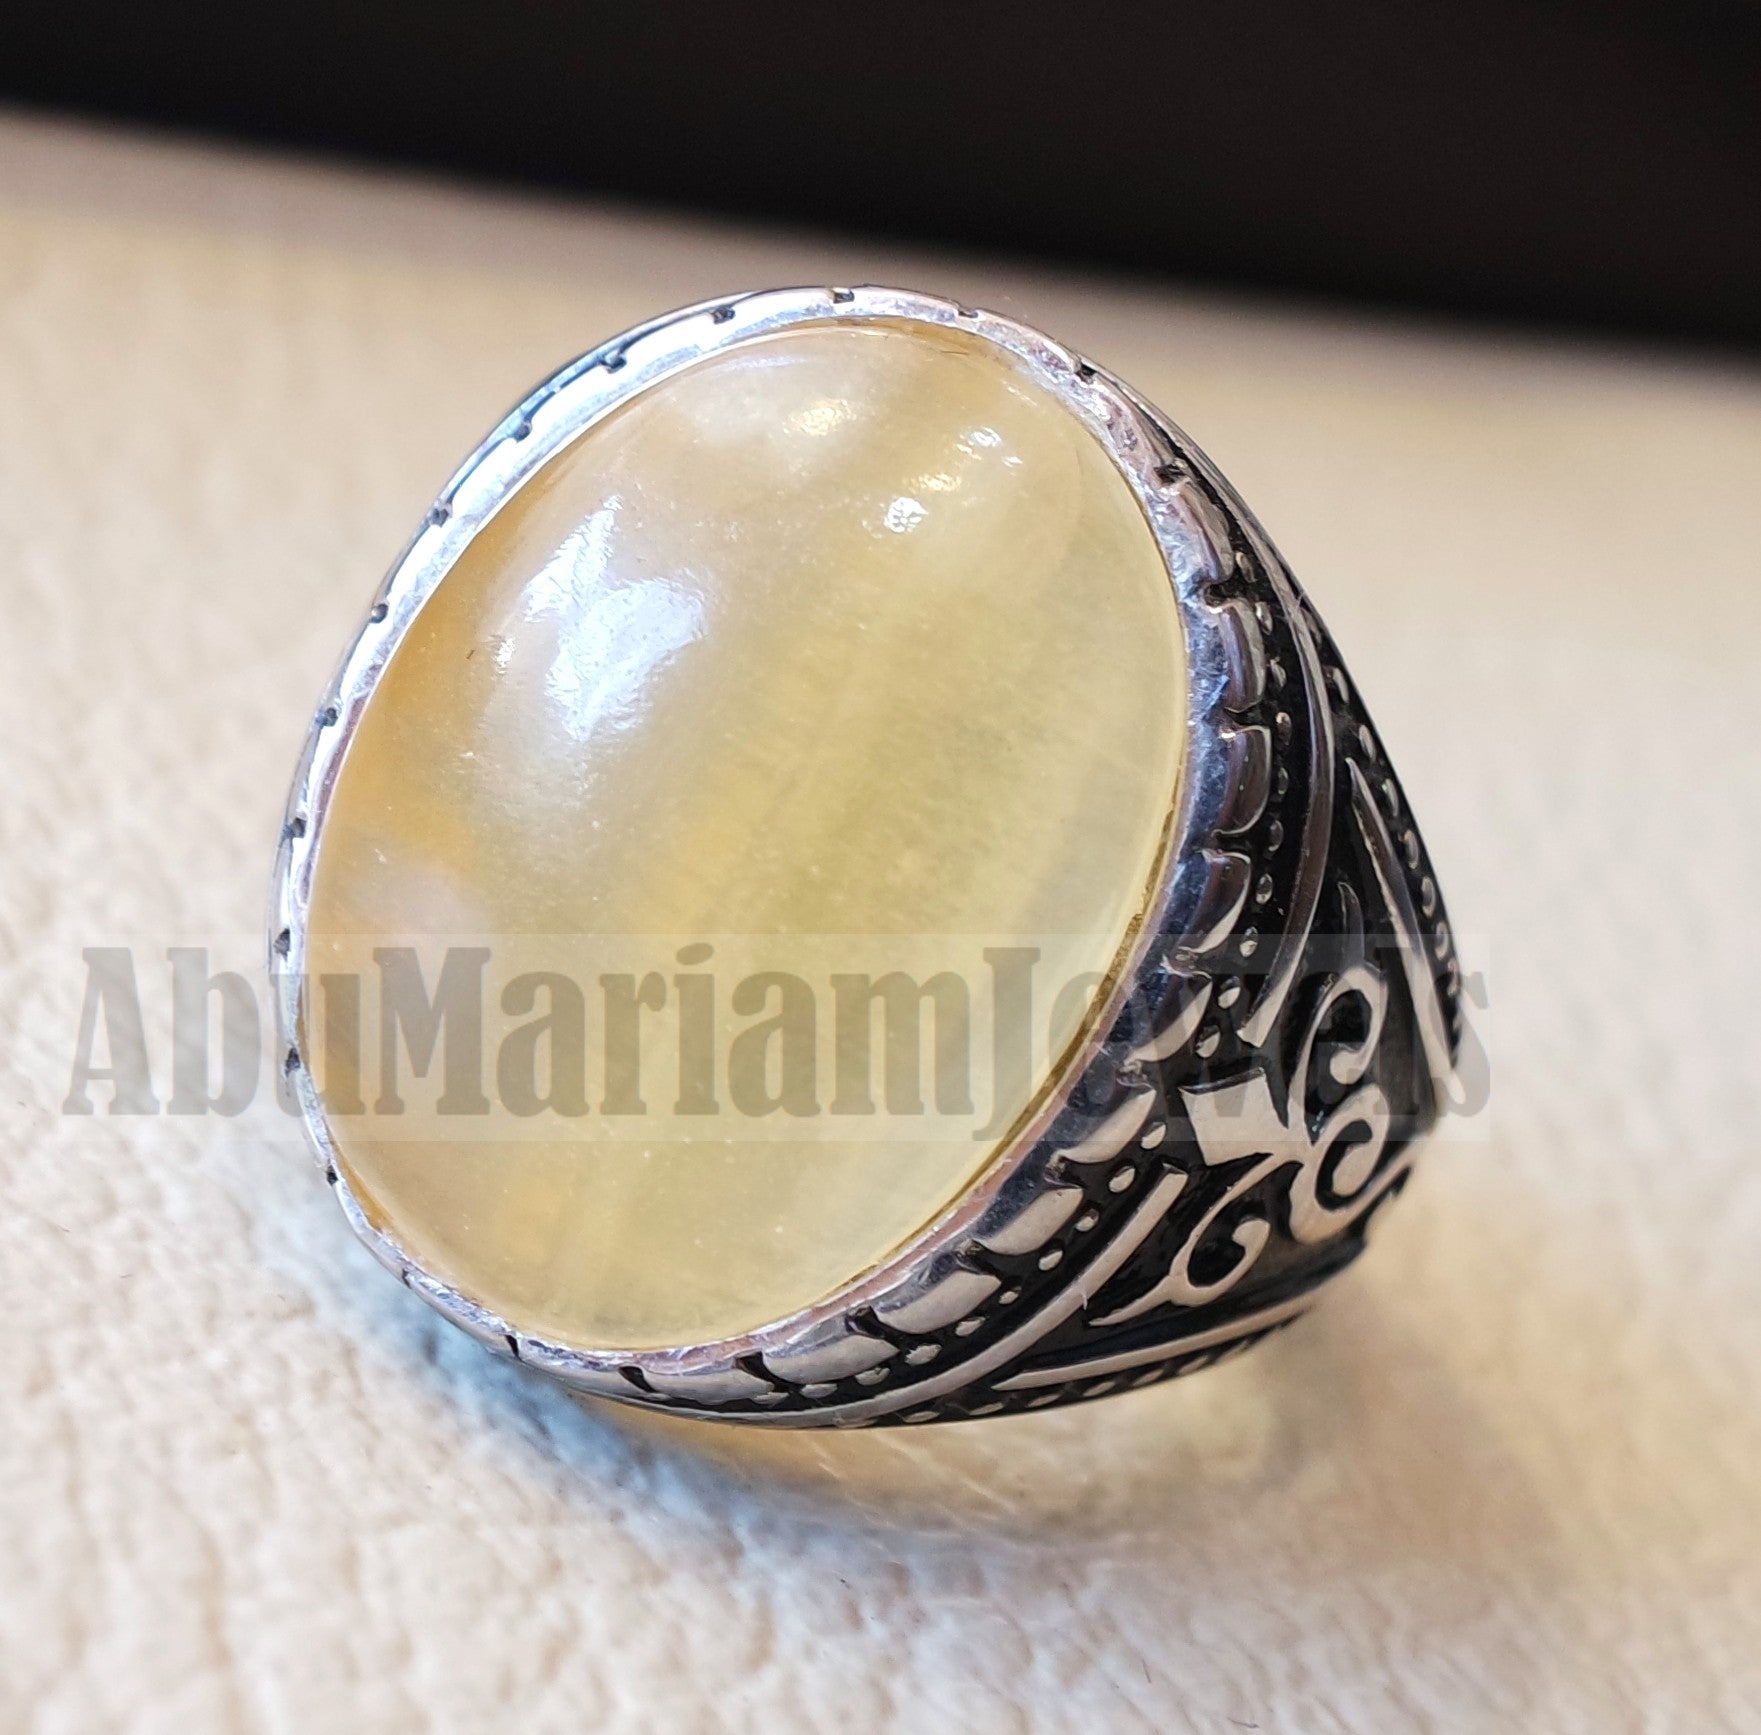 natural yellow fluorite men ring sterling silver 925 unique stone all sizes jewelry fast shipping oxidized ottoman style